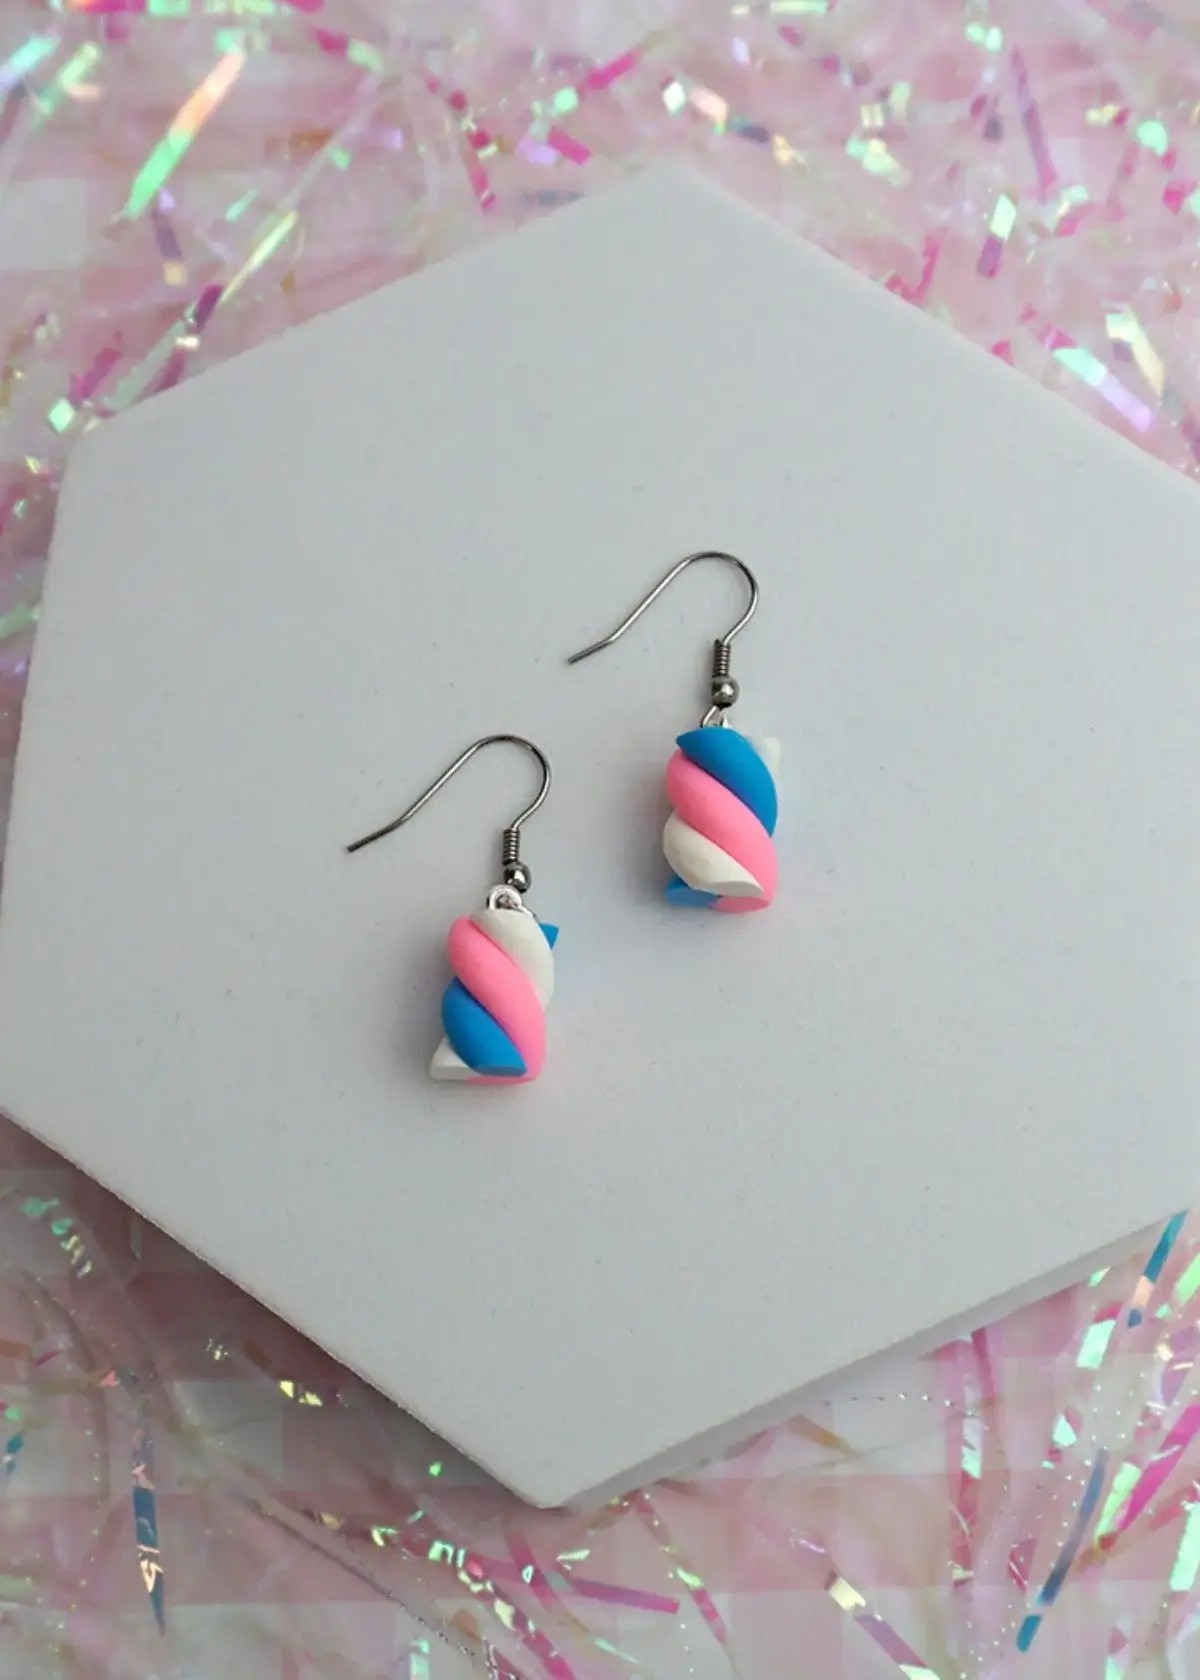 Do Candy Earrings Come With Different Types of Backs?